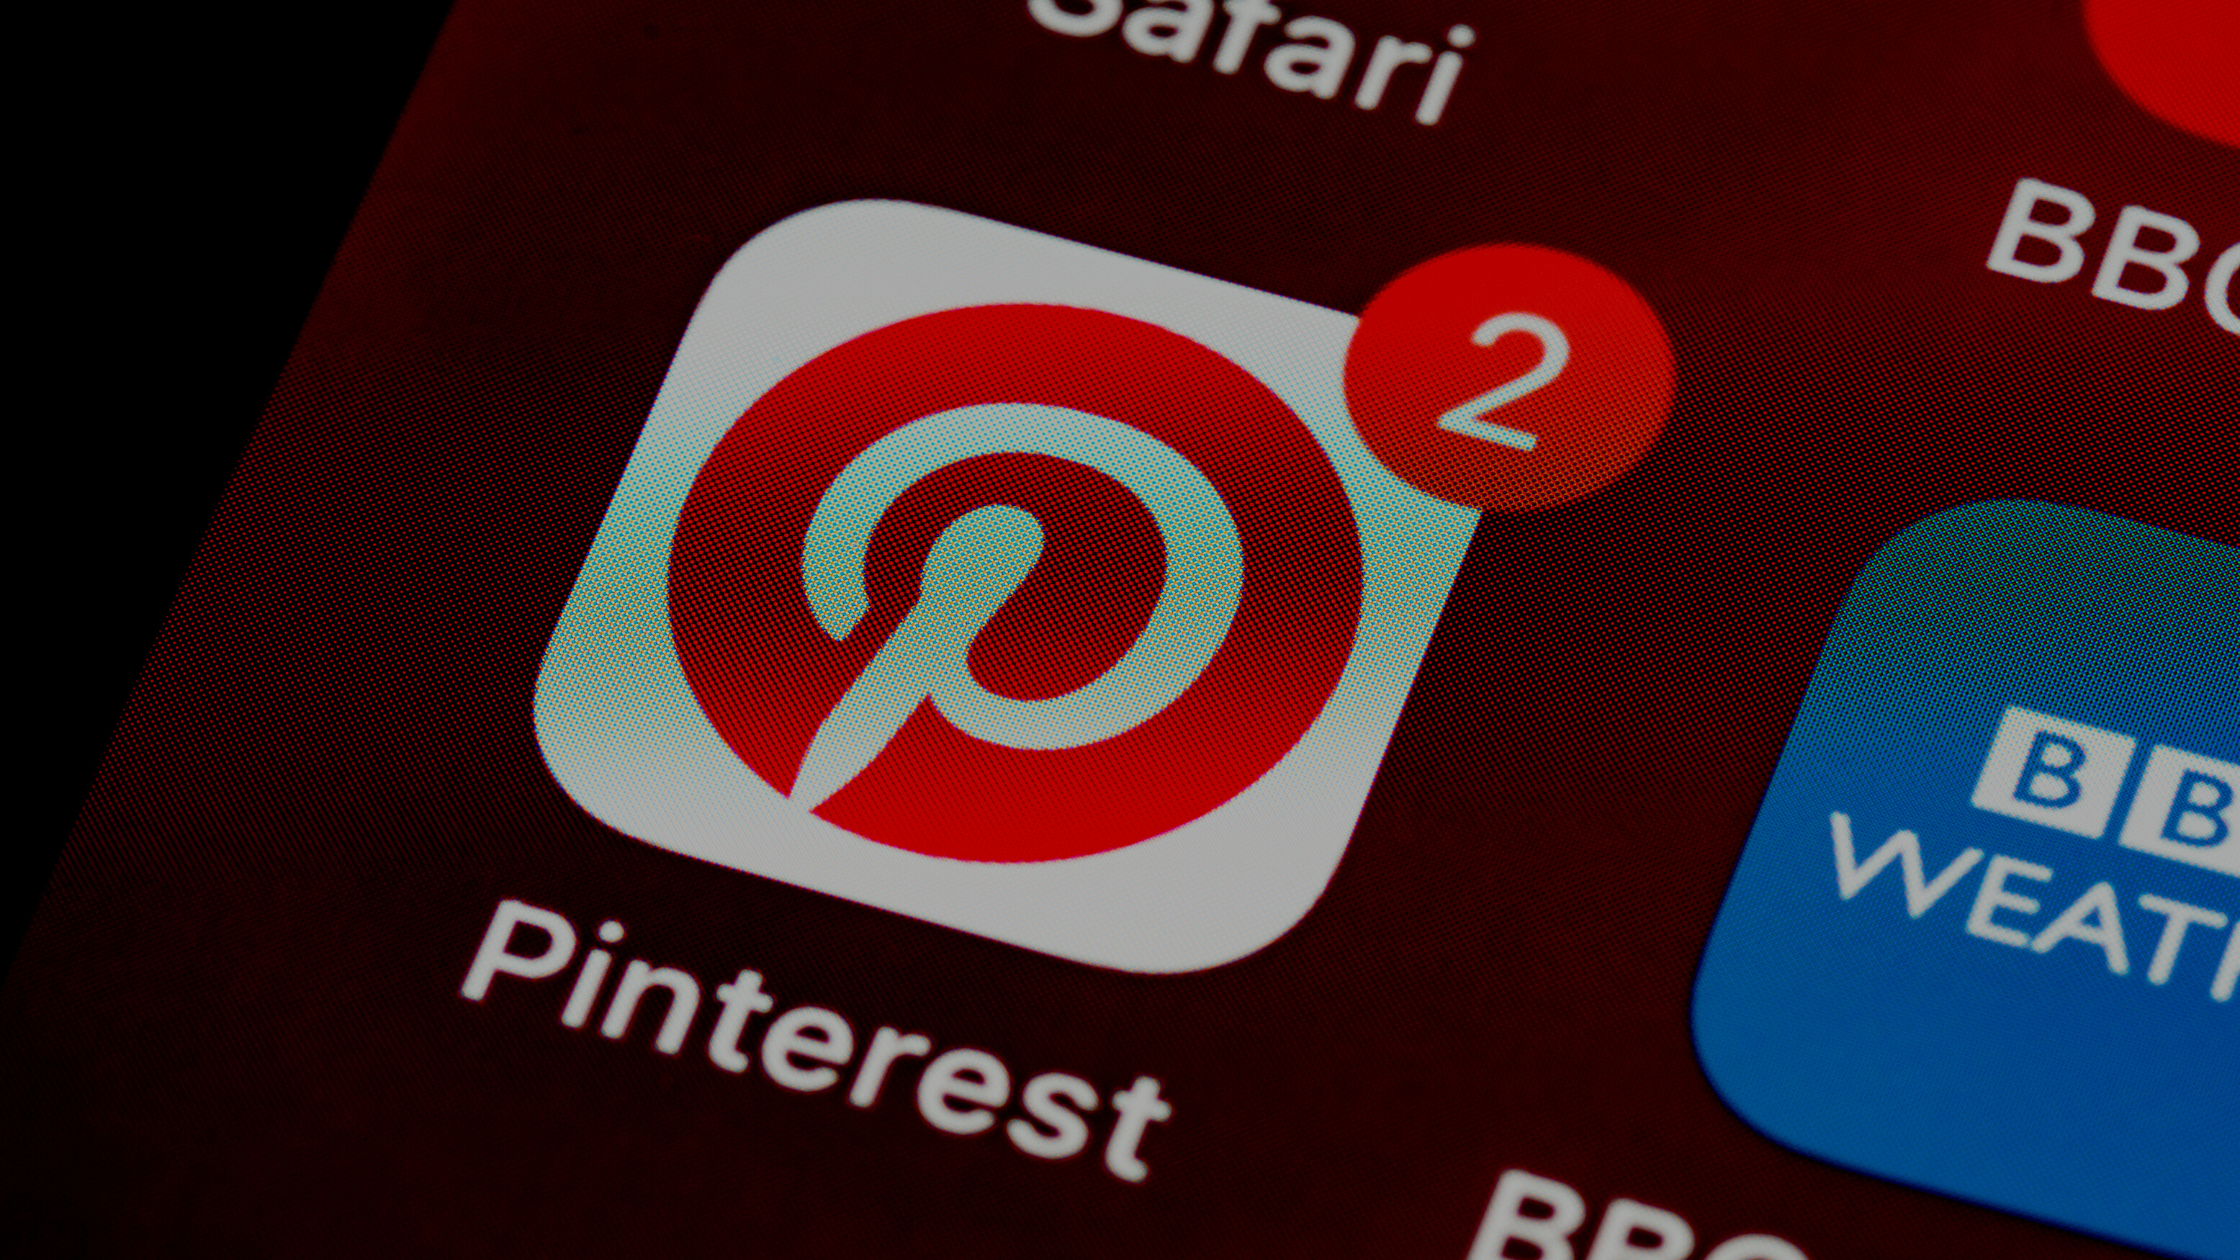 Pinterest Continued to Lose Users in Q2, Despite Ramping Up eCommerce Features